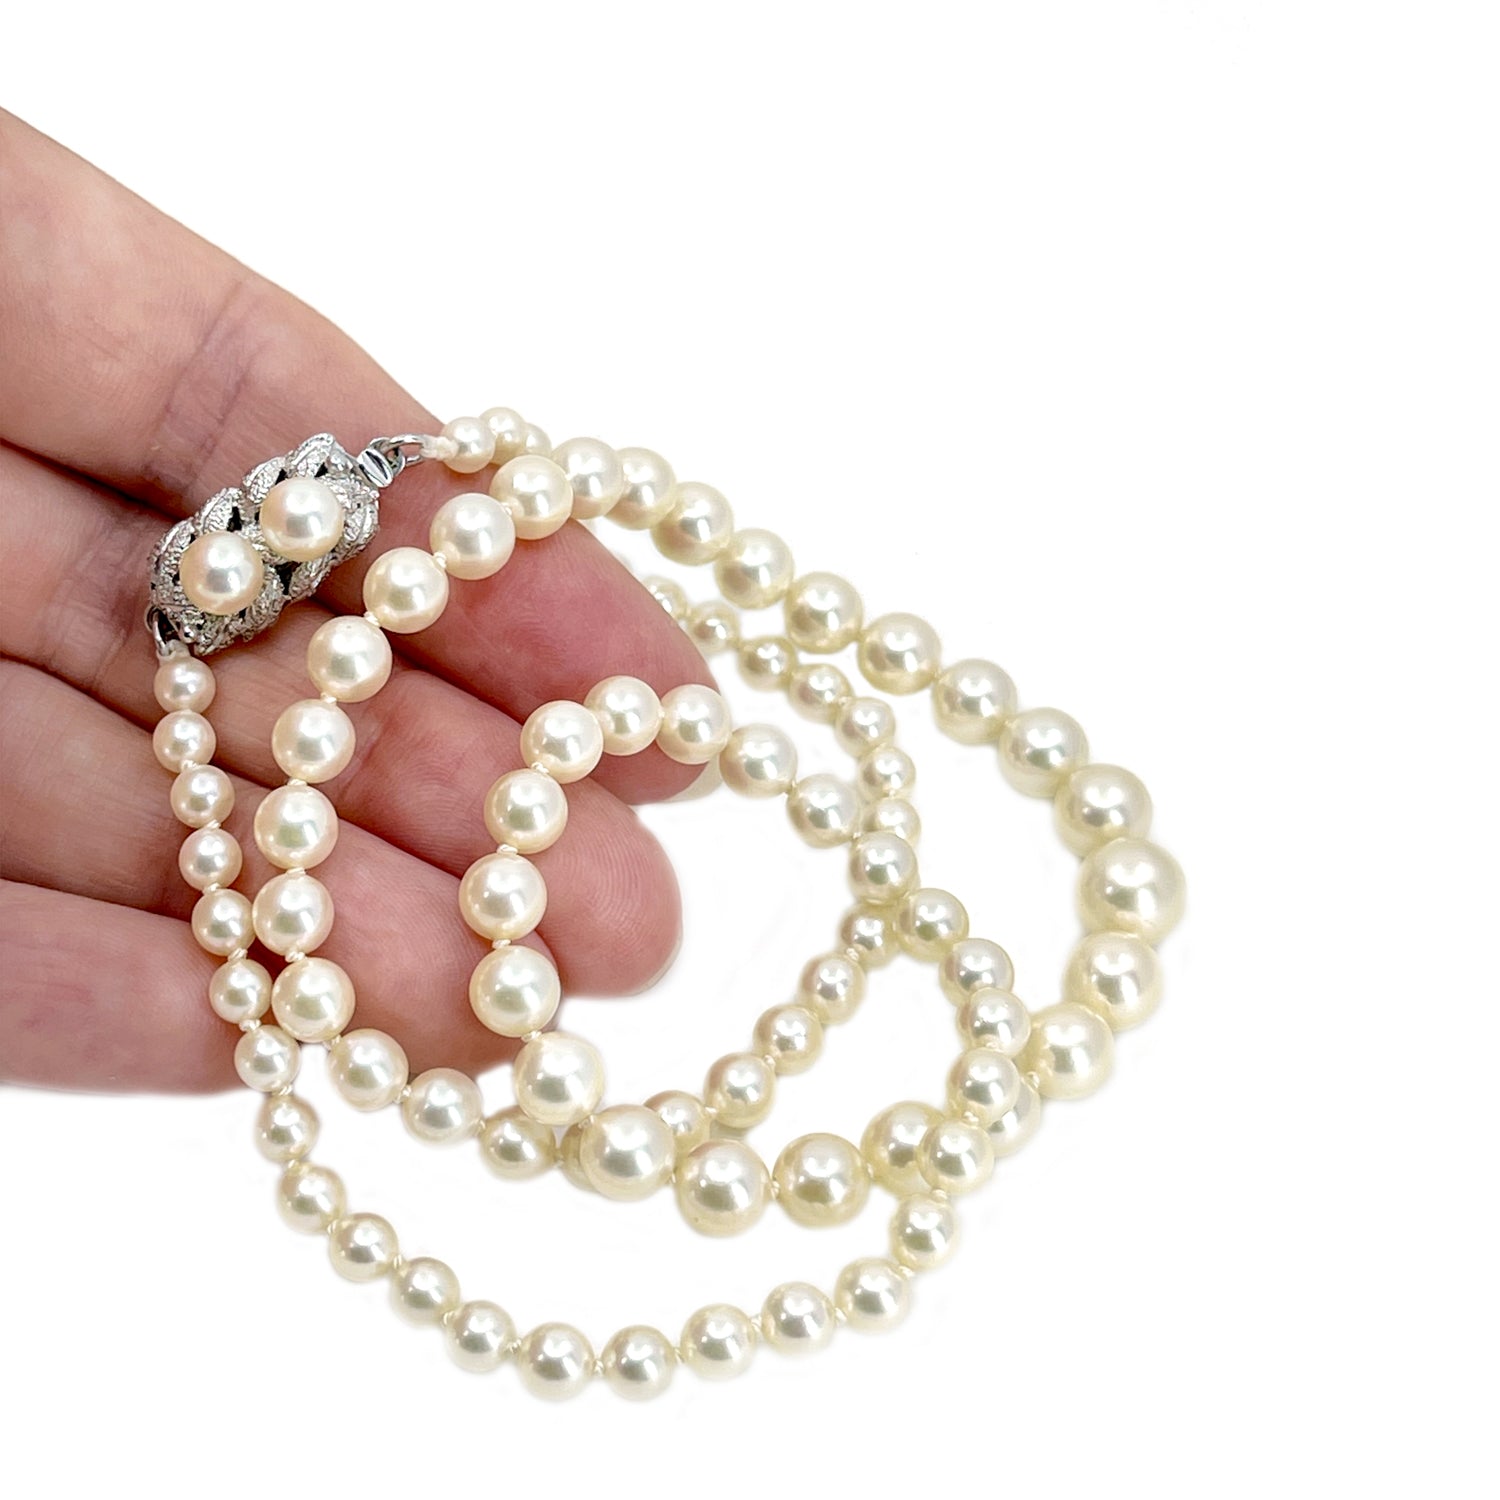 Modernist Japanese Saltwater Cultured Akoya Pearl Vintage Graduated Necklace - Sterling Silver 19.50 Inch